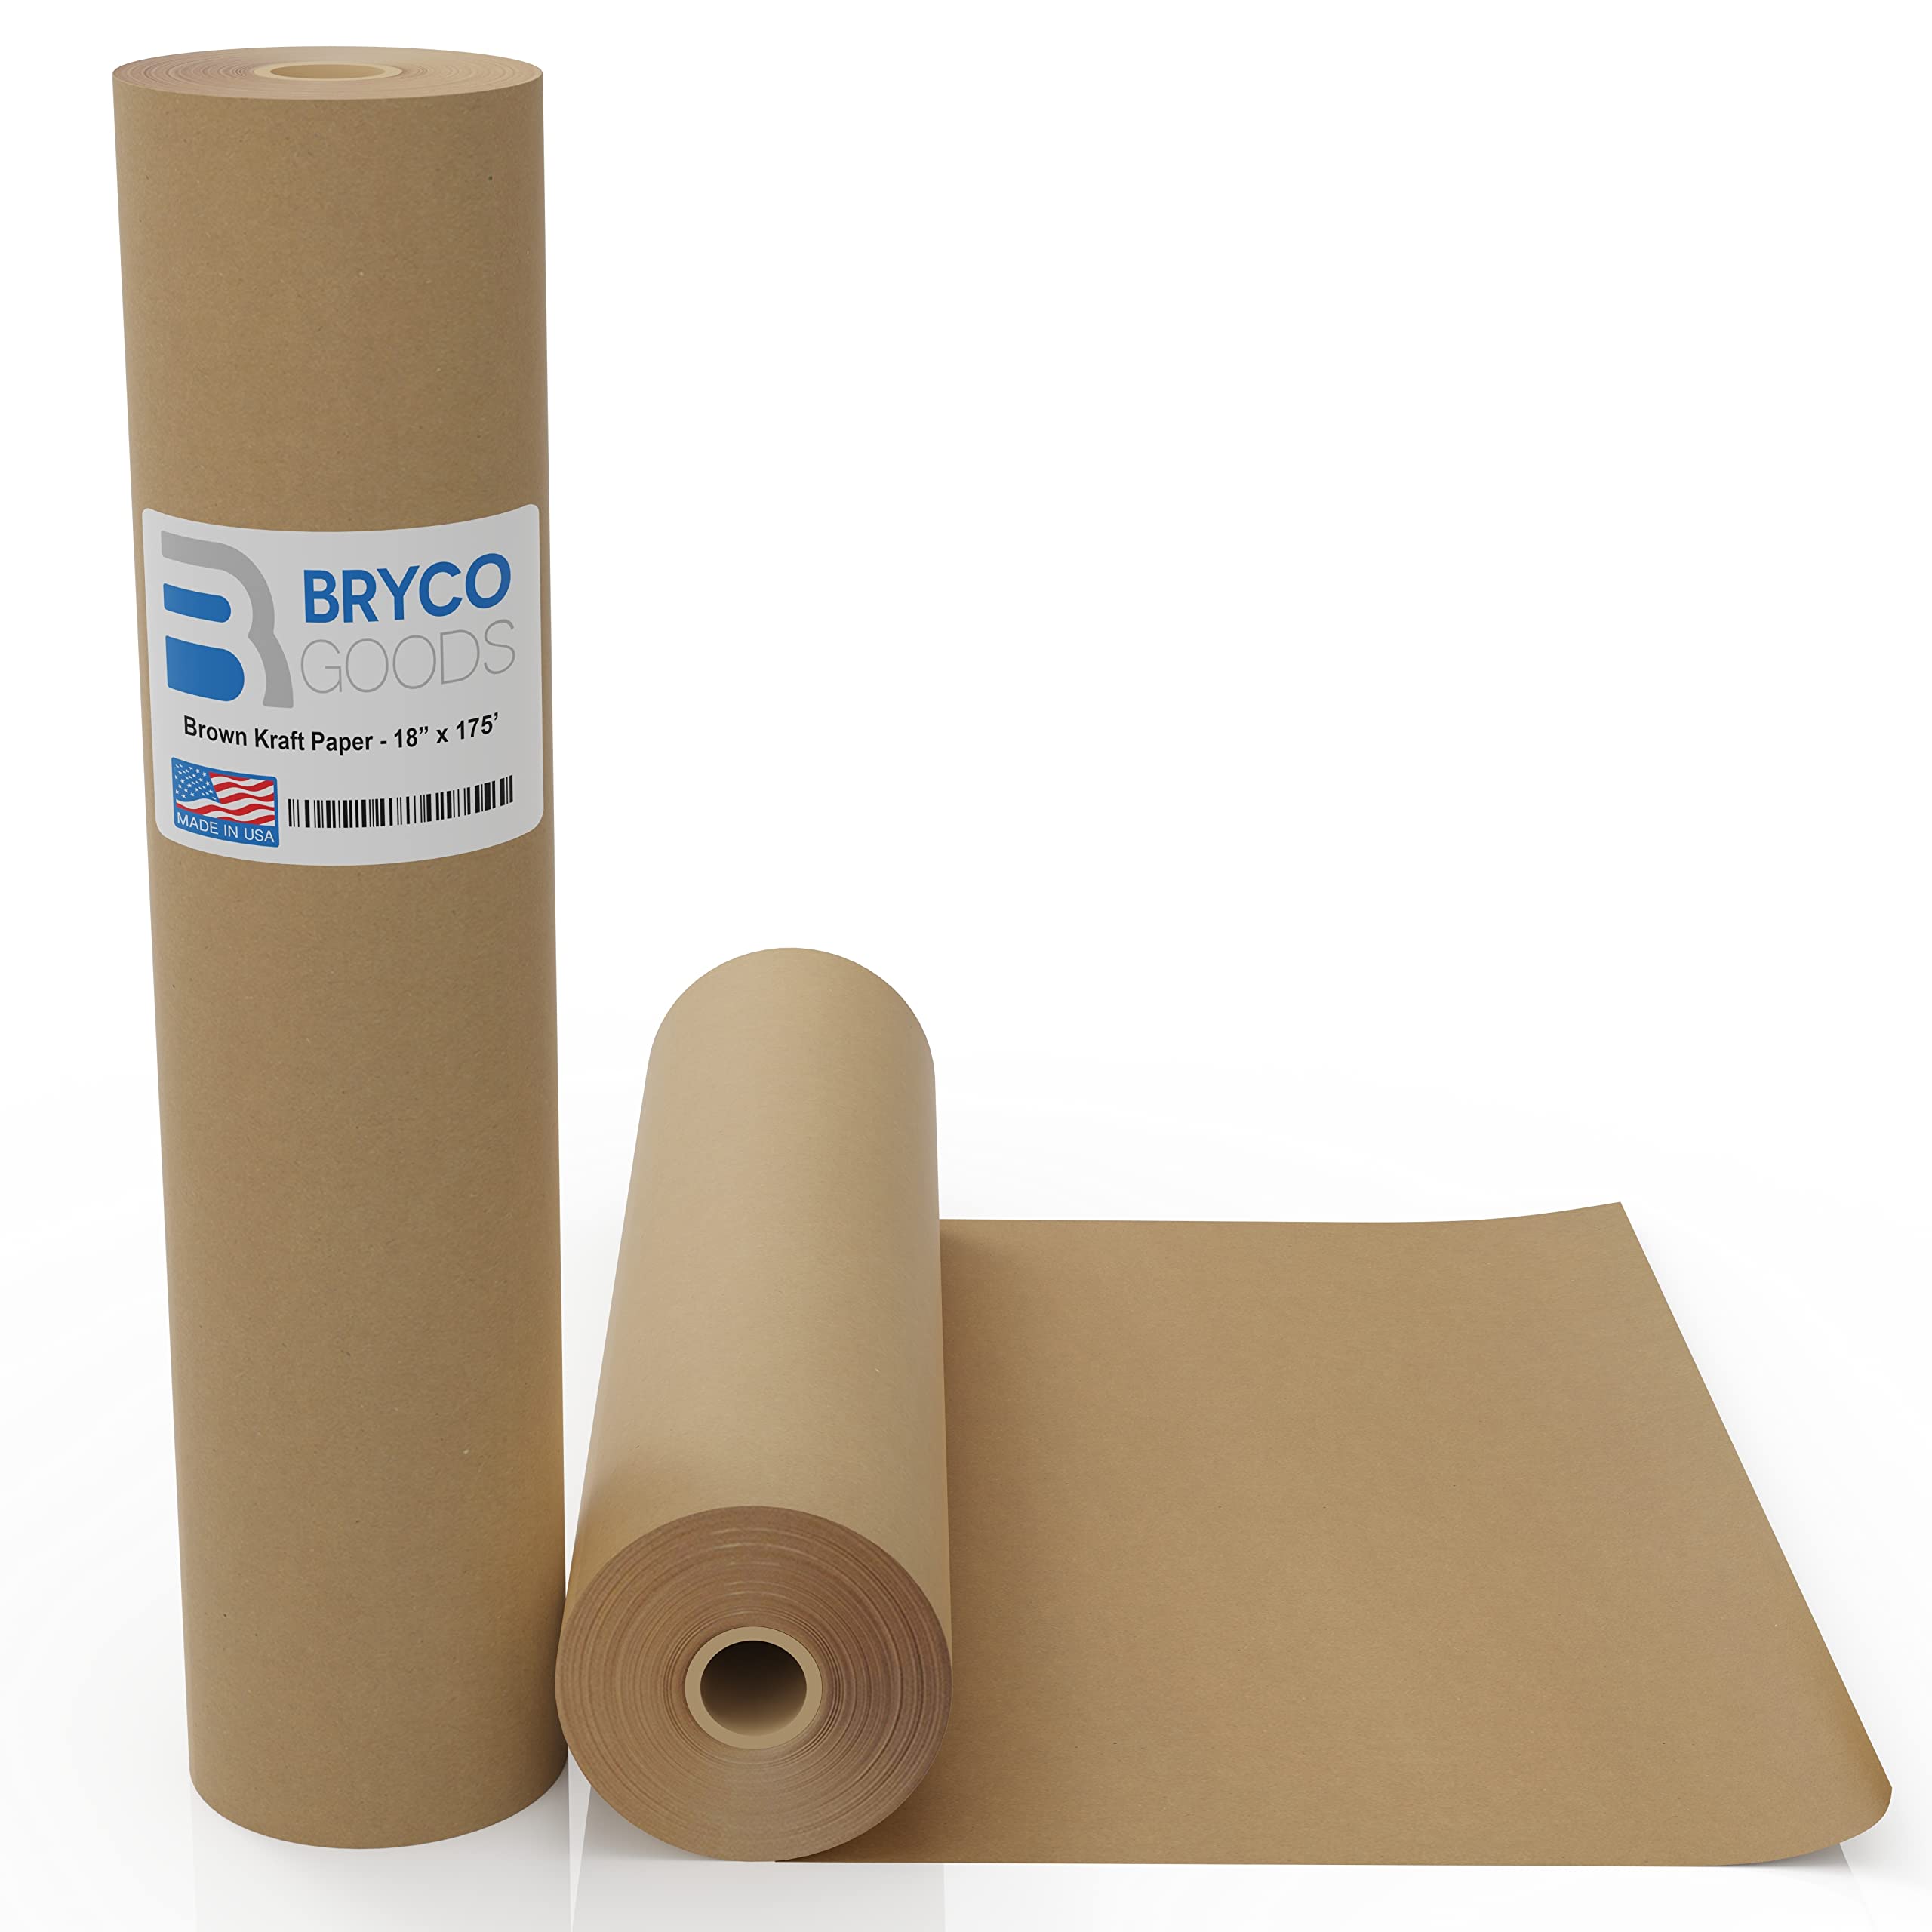 Brown Kraft Paper Roll - 18 x 1,200 (100') Made in The USA - Ideal for  Packing, Moving, Gift Wrapping, Postal, Shipping, Parcel, Wall Art, Crafts,  Bulletin Boards, Floor Covering, Table Runner 